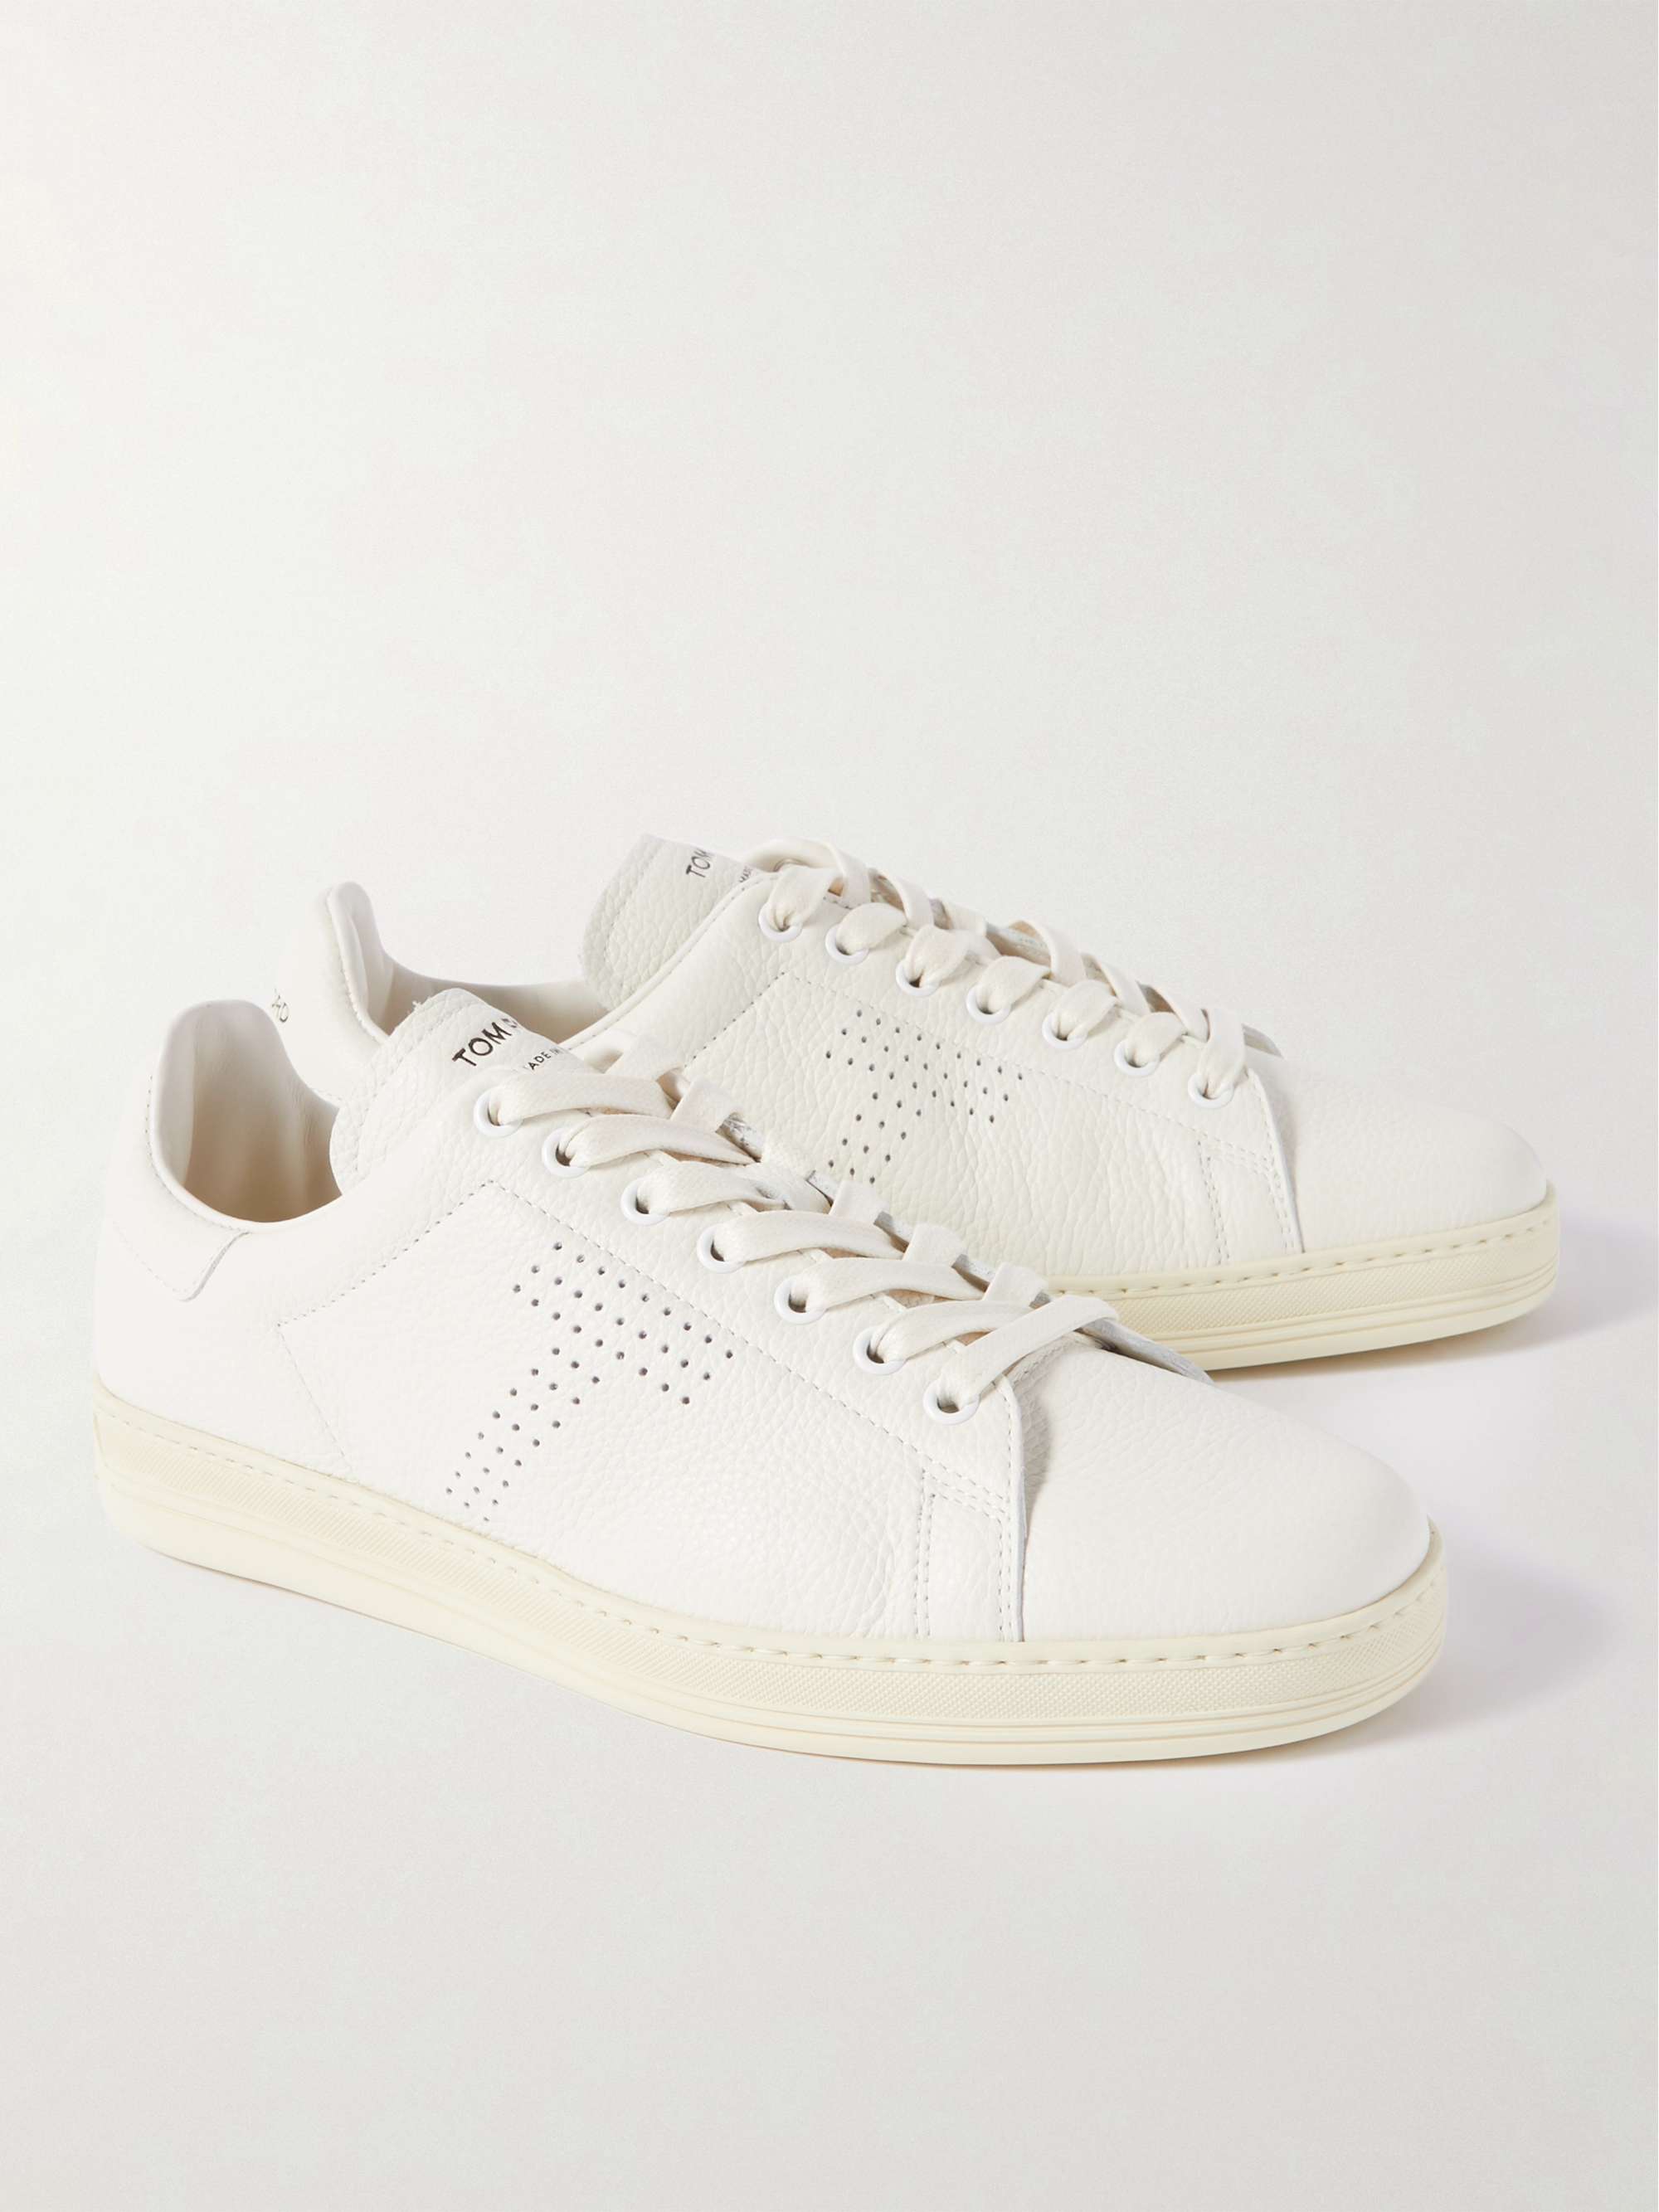 TOM FORD Warwick Perforated Full-Grain Leather Sneakers for Men | MR PORTER